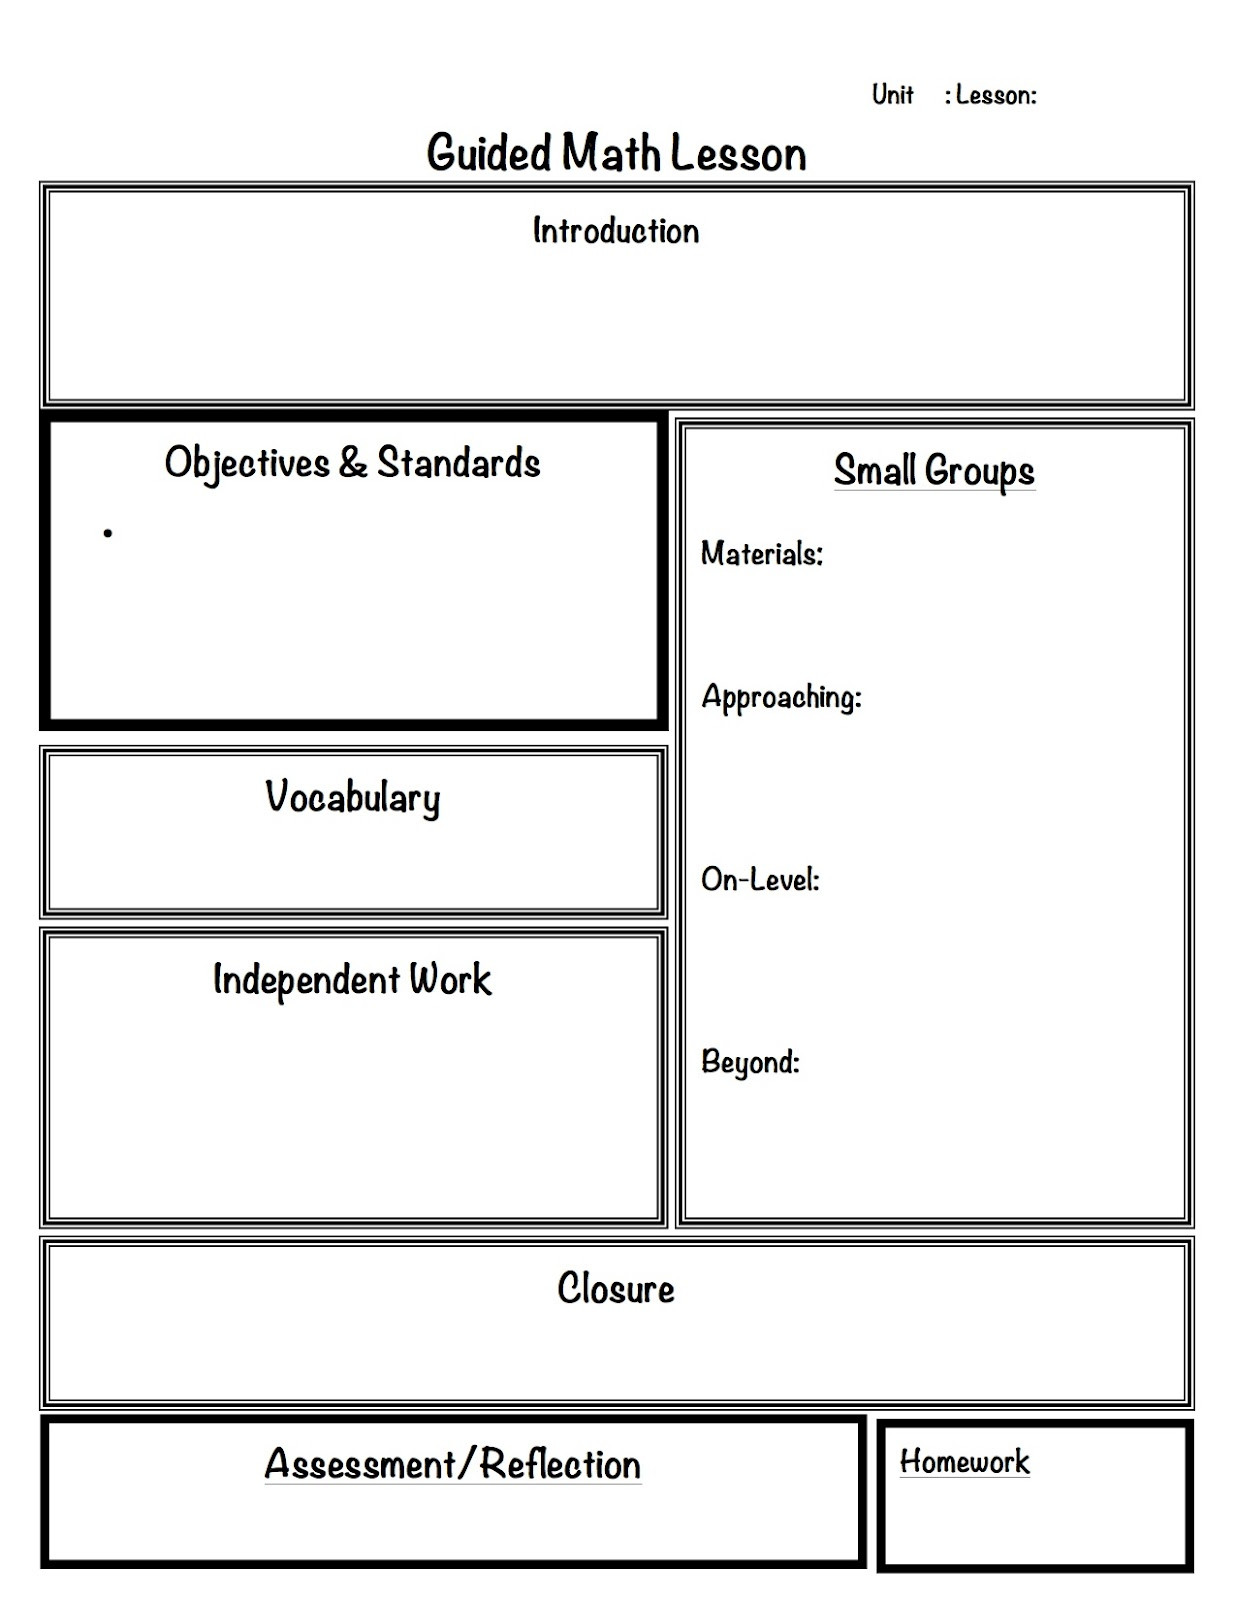 Math Lesson Plan Template 2 organized Apples Classroom solutions for Grades 3 5